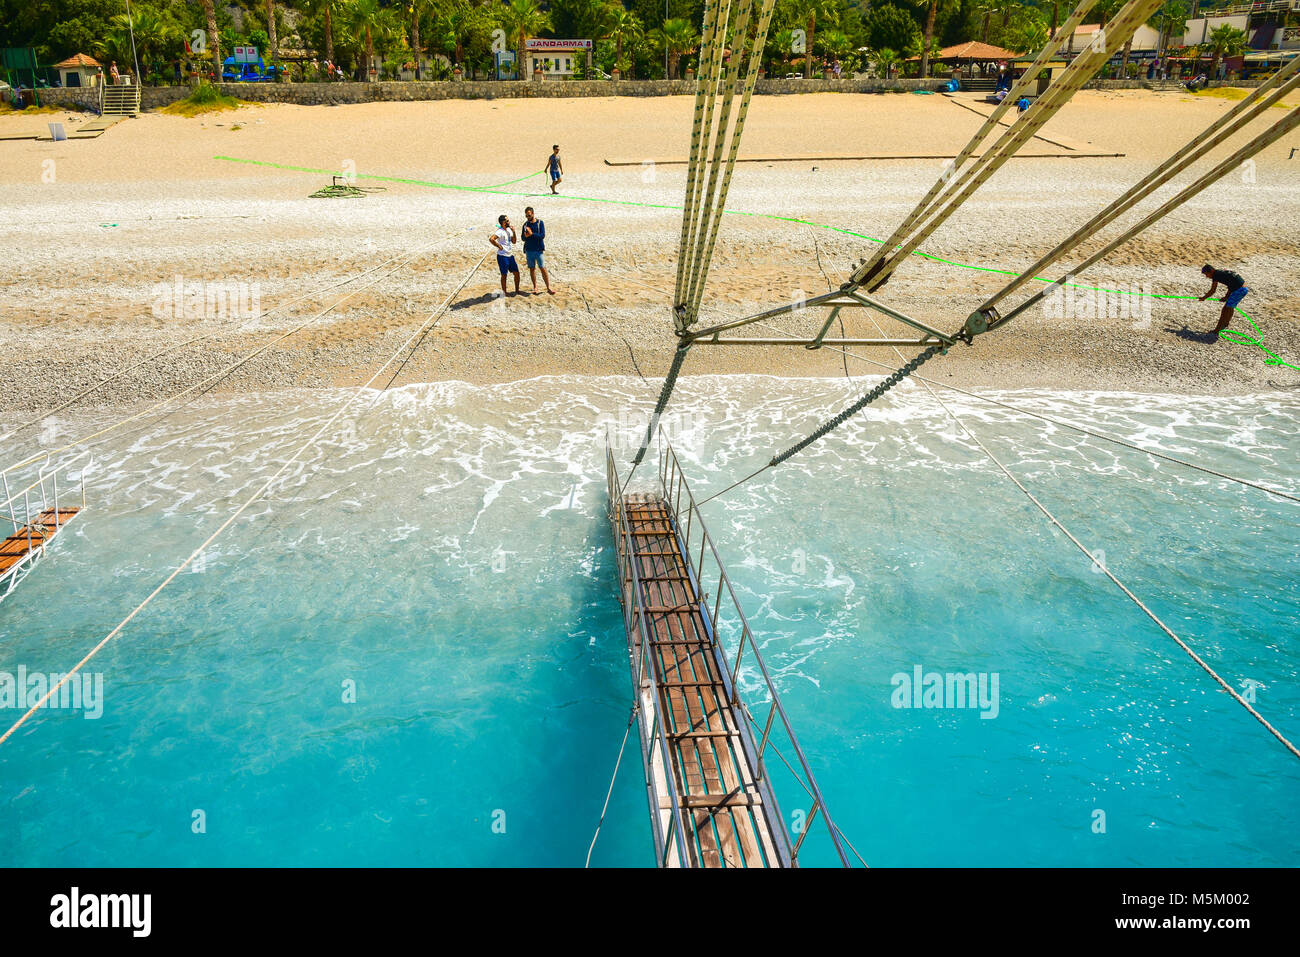 Oludeniz, Turkey - May 11, 2017: Sailing ships for sea excursions in the harbor, movable bridges for tourists to get in and get out from boat. Editori Stock Photo